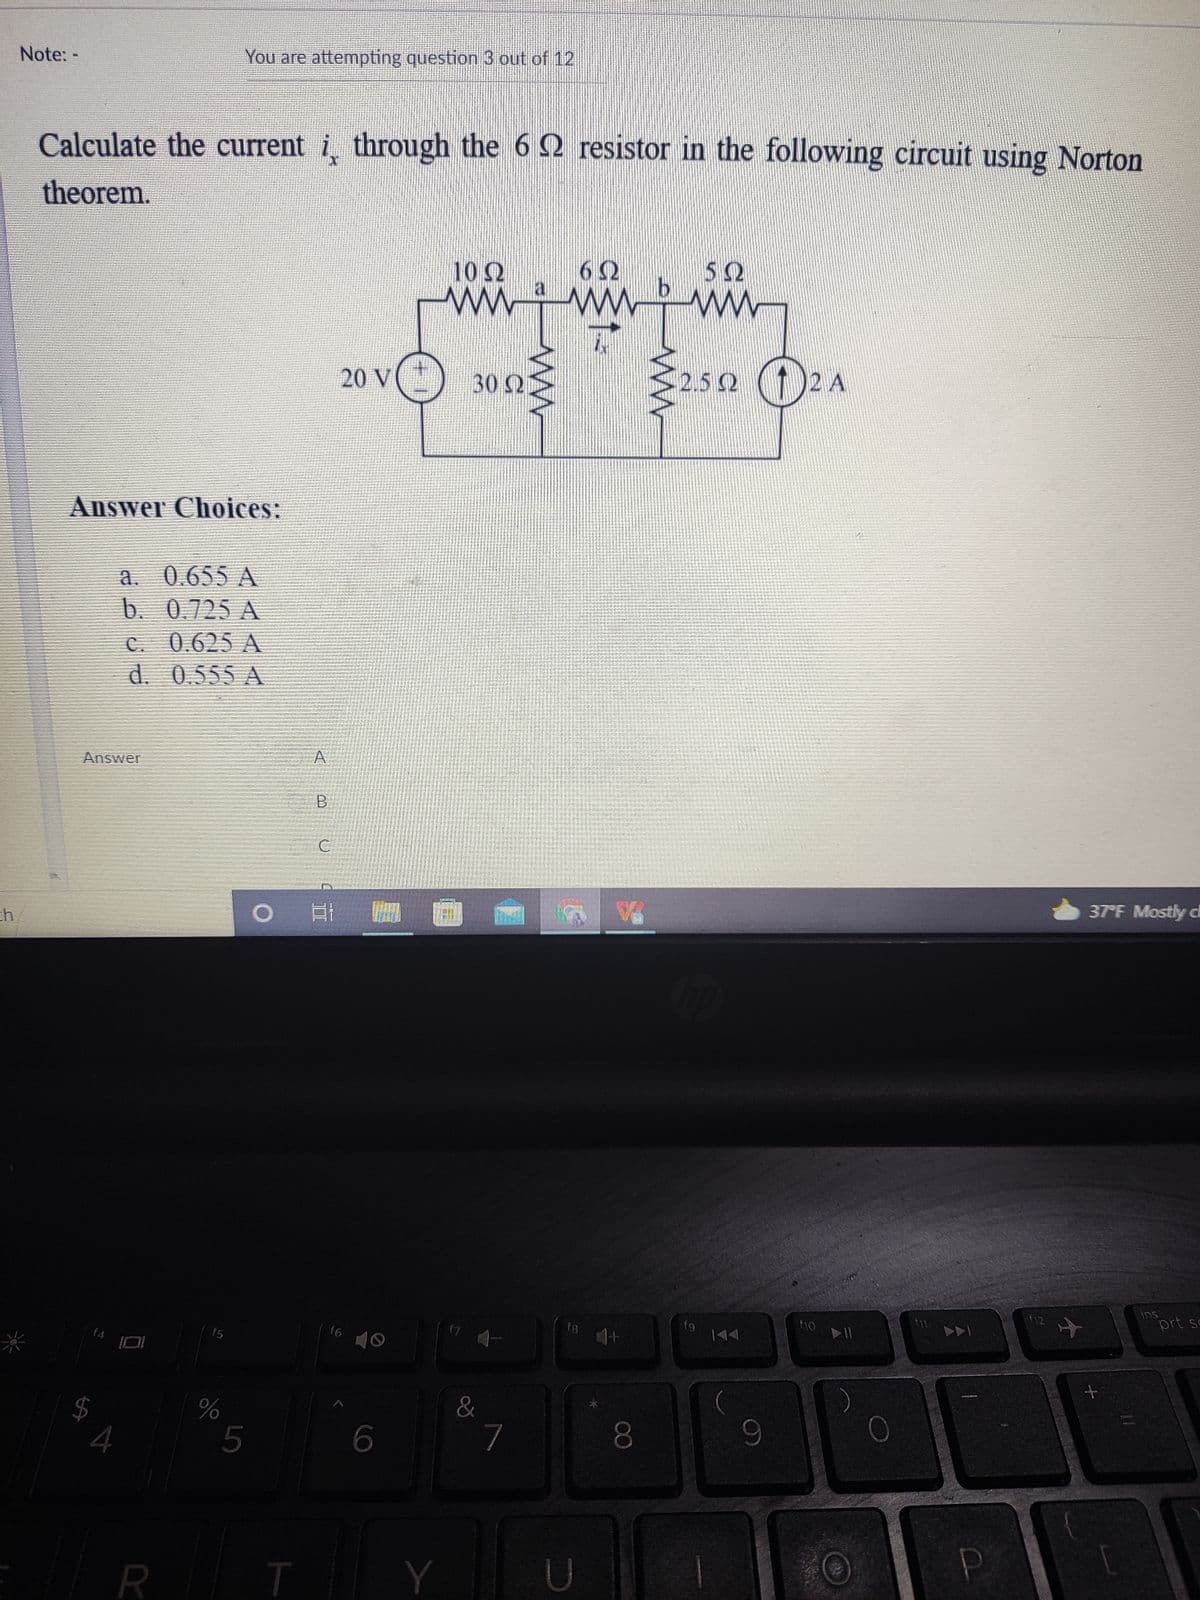 Note: -
You are attempting question 3 out of 12
Calculate the current i through the 6 2 resistor in the following circuit using Norton
theorem.
10Ω
62
5Ω
ww
a
20 V
302
32.52 (1)2A
Answer Choices:
a. 0.655 A
b. 0.725 A
C. 0.625 A
d. 0.555 A
Answer
A
B
ch
37 F Mostly d
ins
prt sc
fg
144
f4
f5
f6
米
%
&
4
5
7
080
R T
Y
